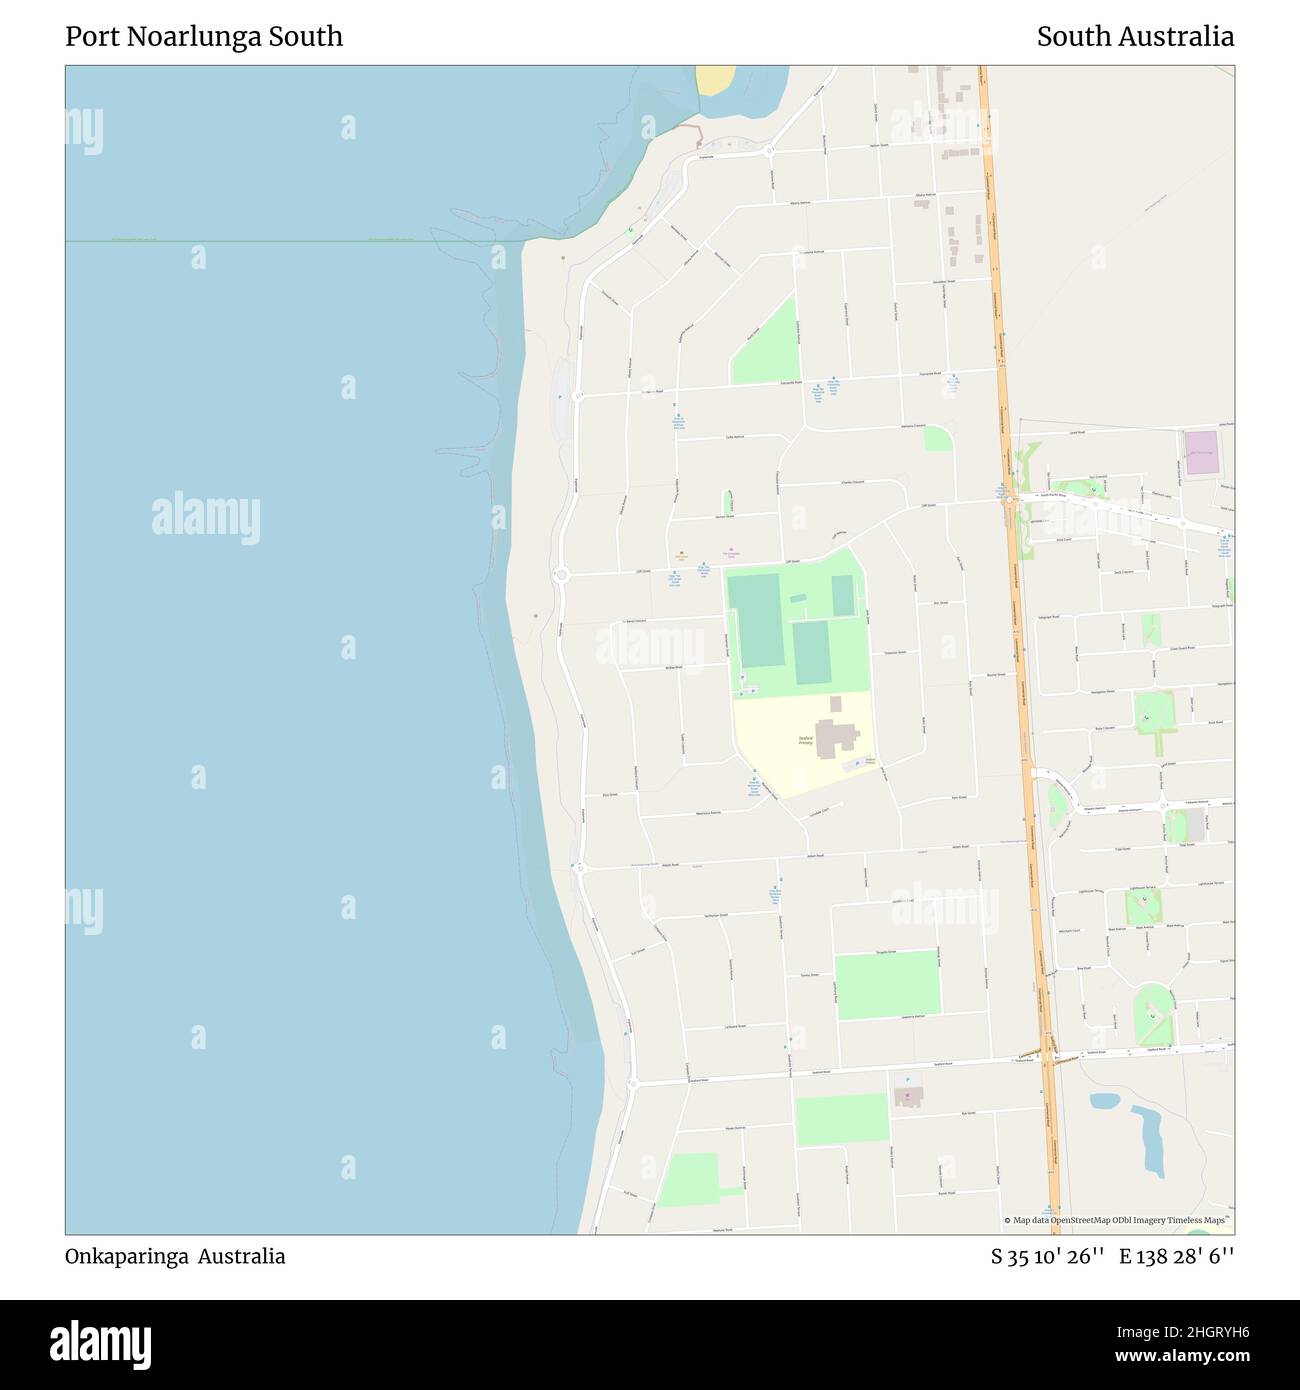 Port Noarlunga South, Onkaparinga, Australia, South Australia, S 35 10' 26'', E 138 28' 6'', map, Timeless Map published in 2021. Travelers, explorers and adventurers like Florence Nightingale, David Livingstone, Ernest Shackleton, Lewis and Clark and Sherlock Holmes relied on maps to plan travels to the world's most remote corners, Timeless Maps is mapping most locations on the globe, showing the achievement of great dreams Stock Photo